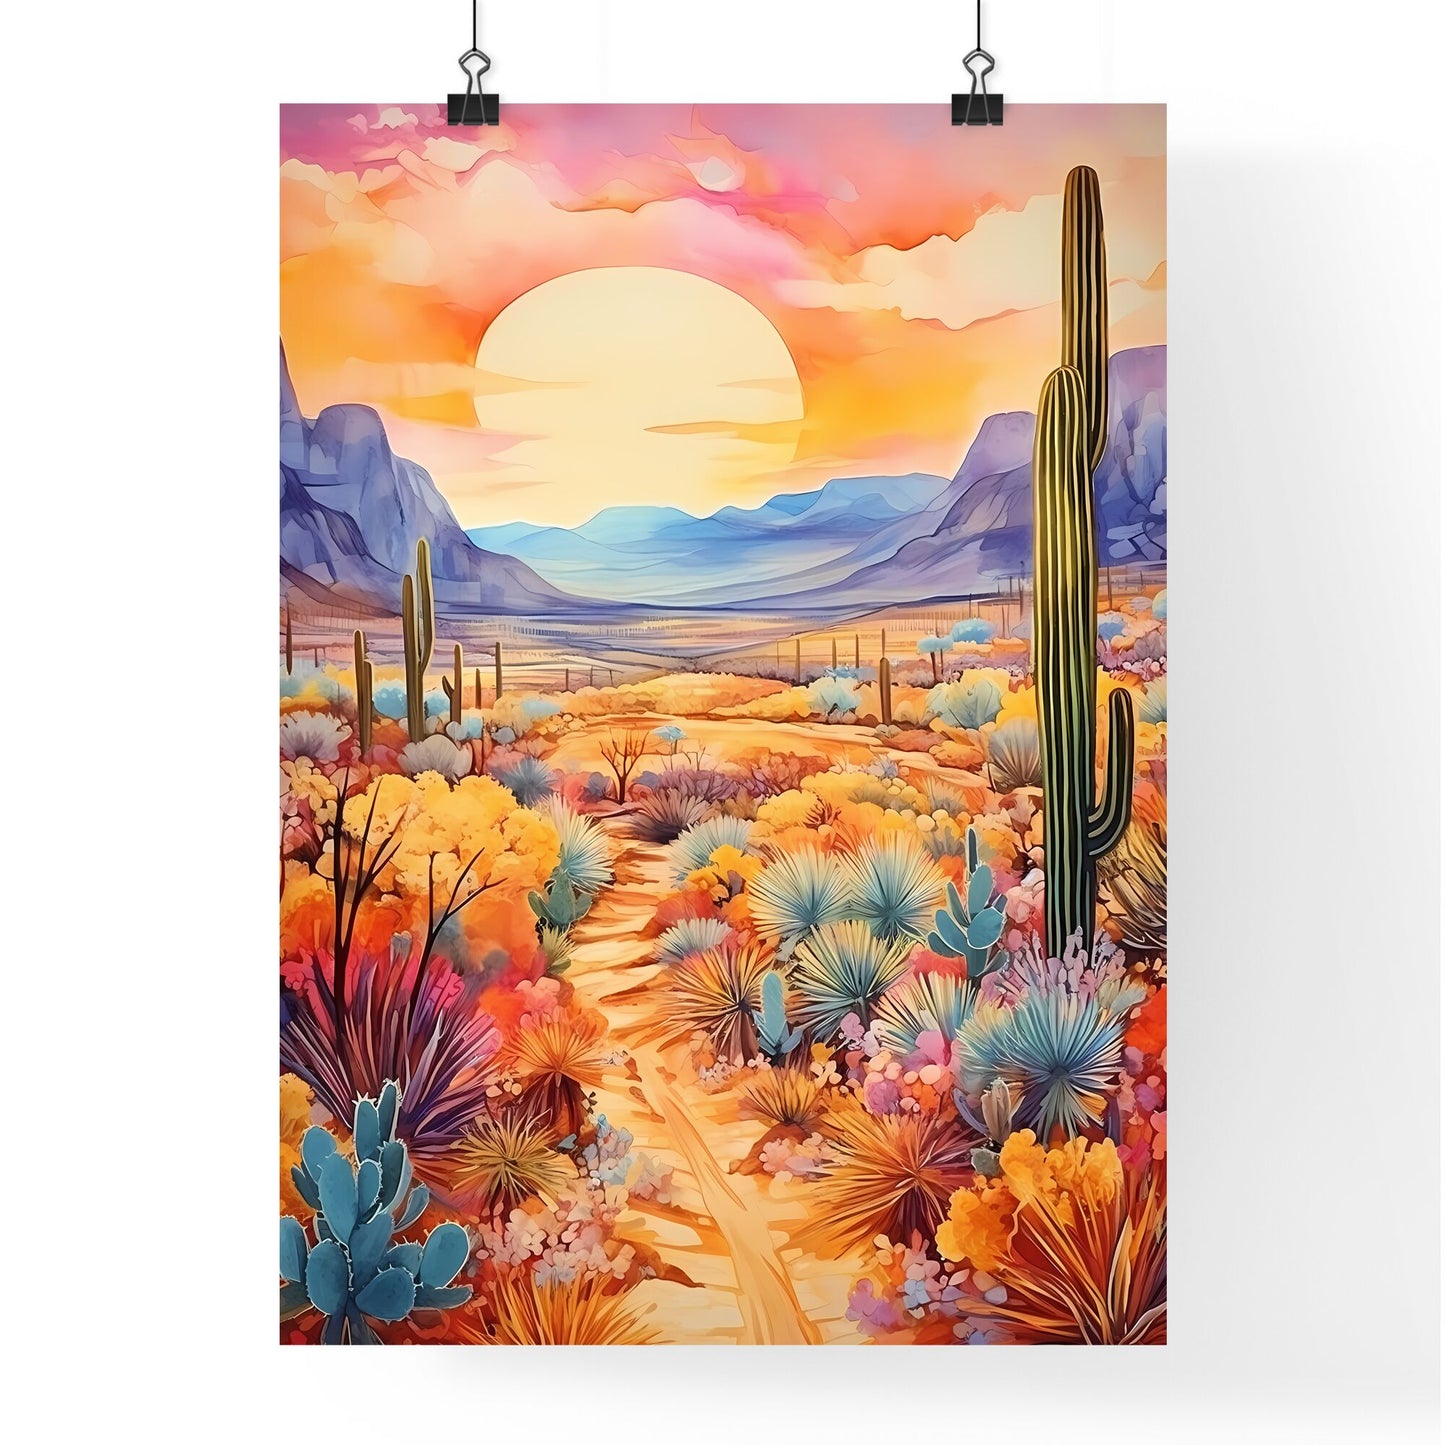 Painting Of A Desert Landscape With Cactus And Mountains Art Print Default Title